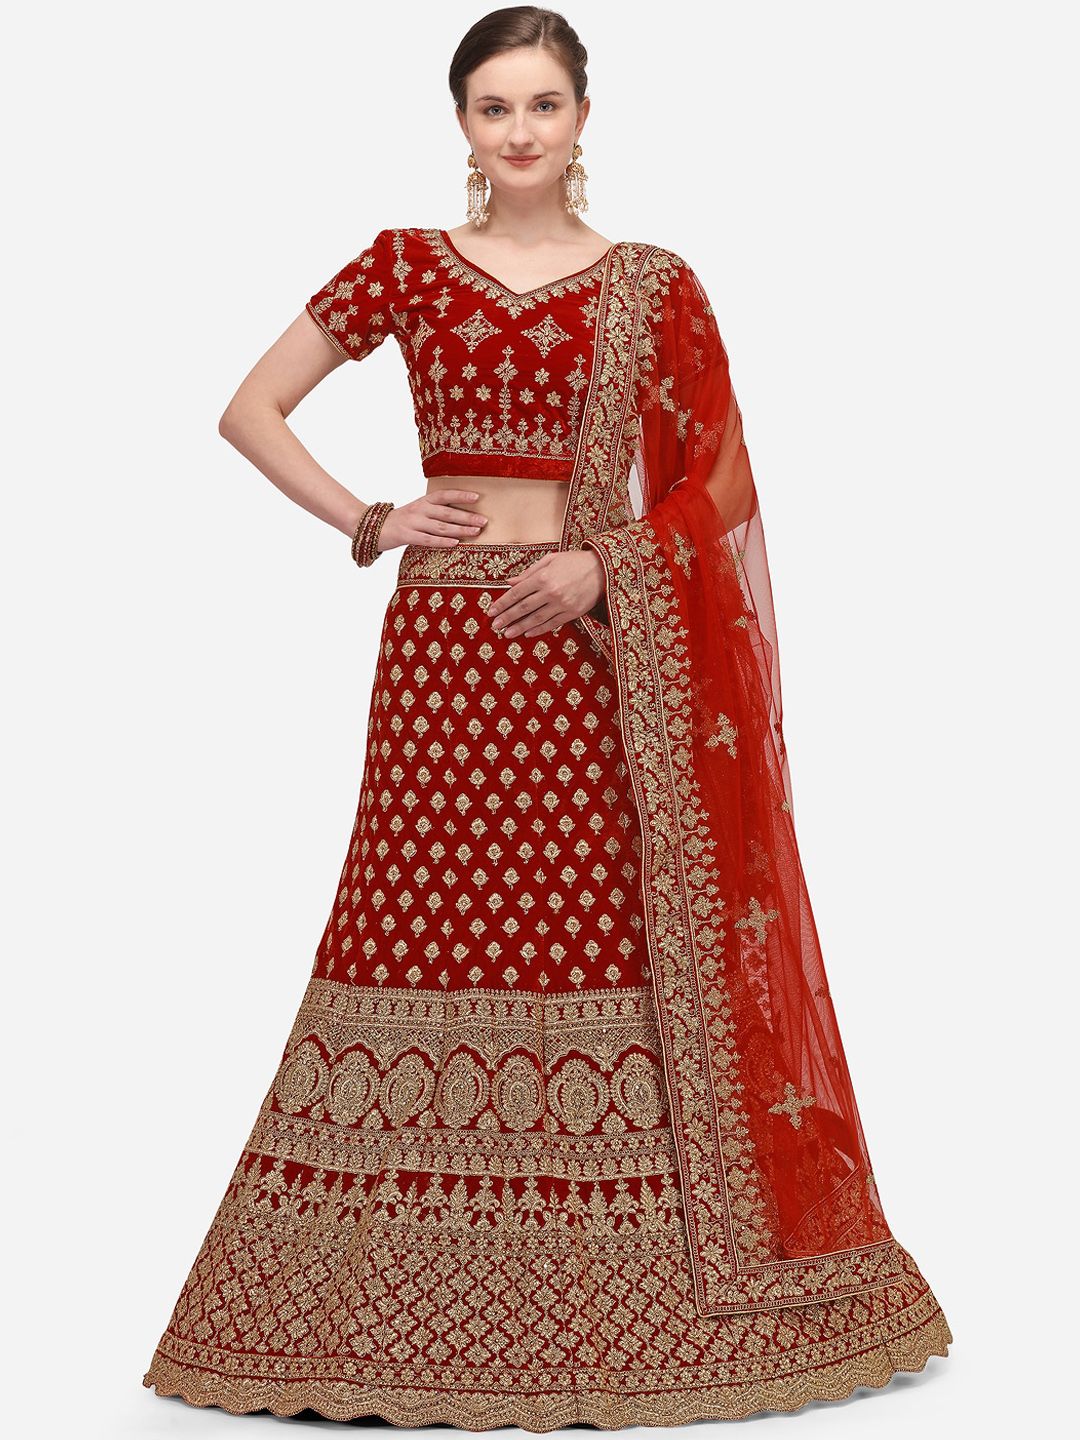 V SALES Red & Gold-Toned Embroidered Semi-Stitched Lehenga & Unstitched Blouse with Dupatta Price in India